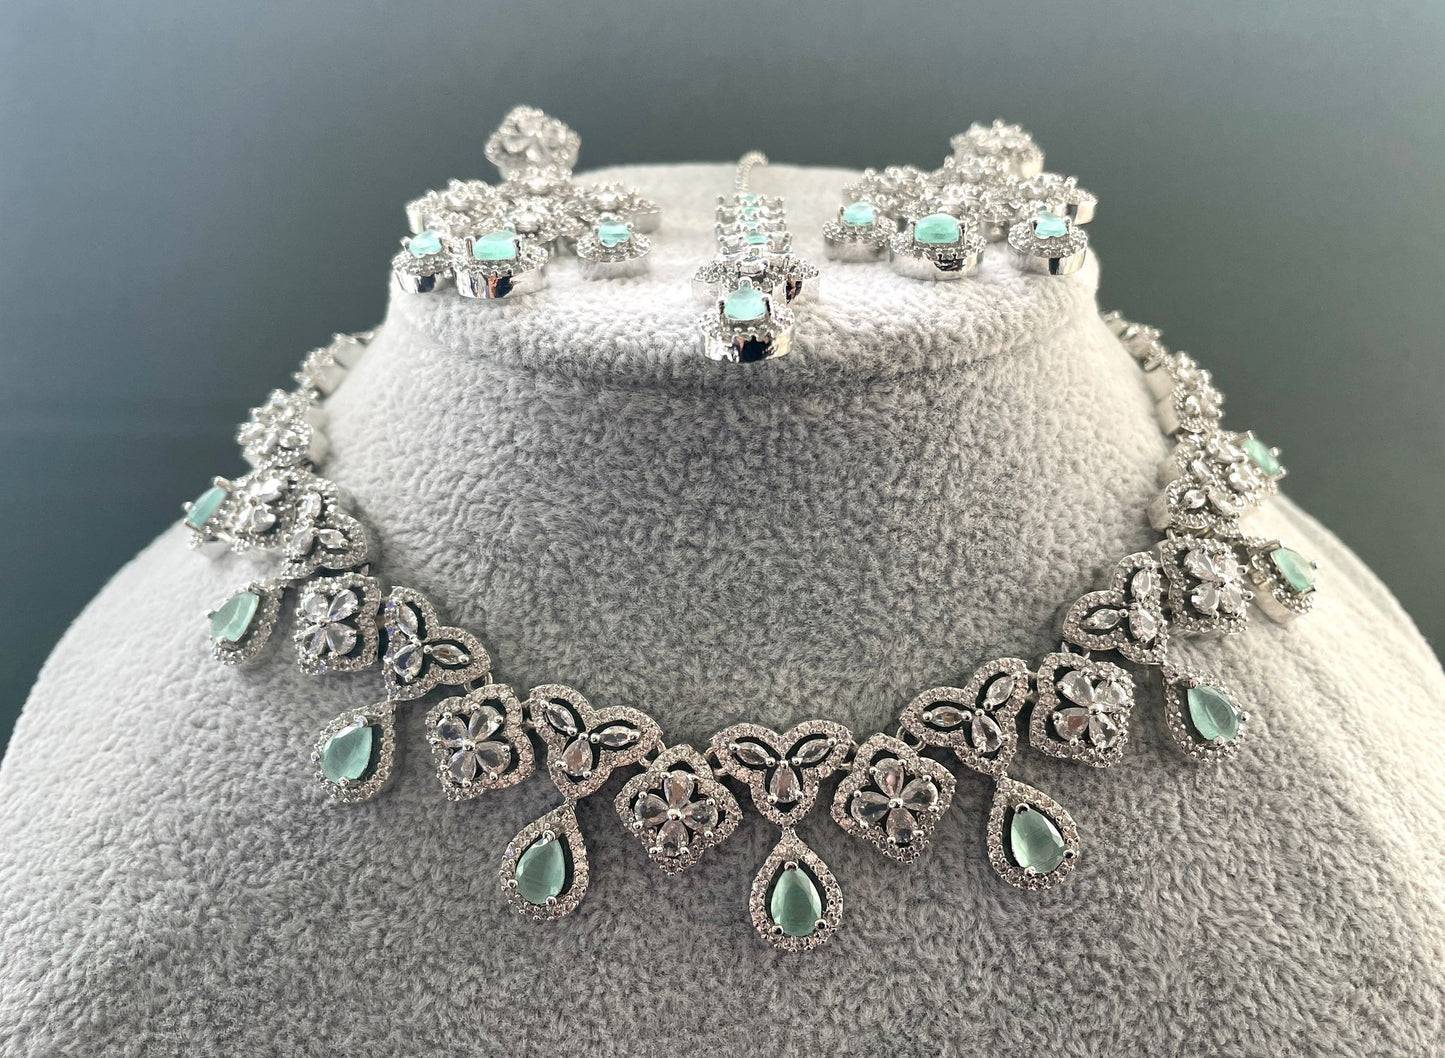 Beautiful necklace with matching earrings